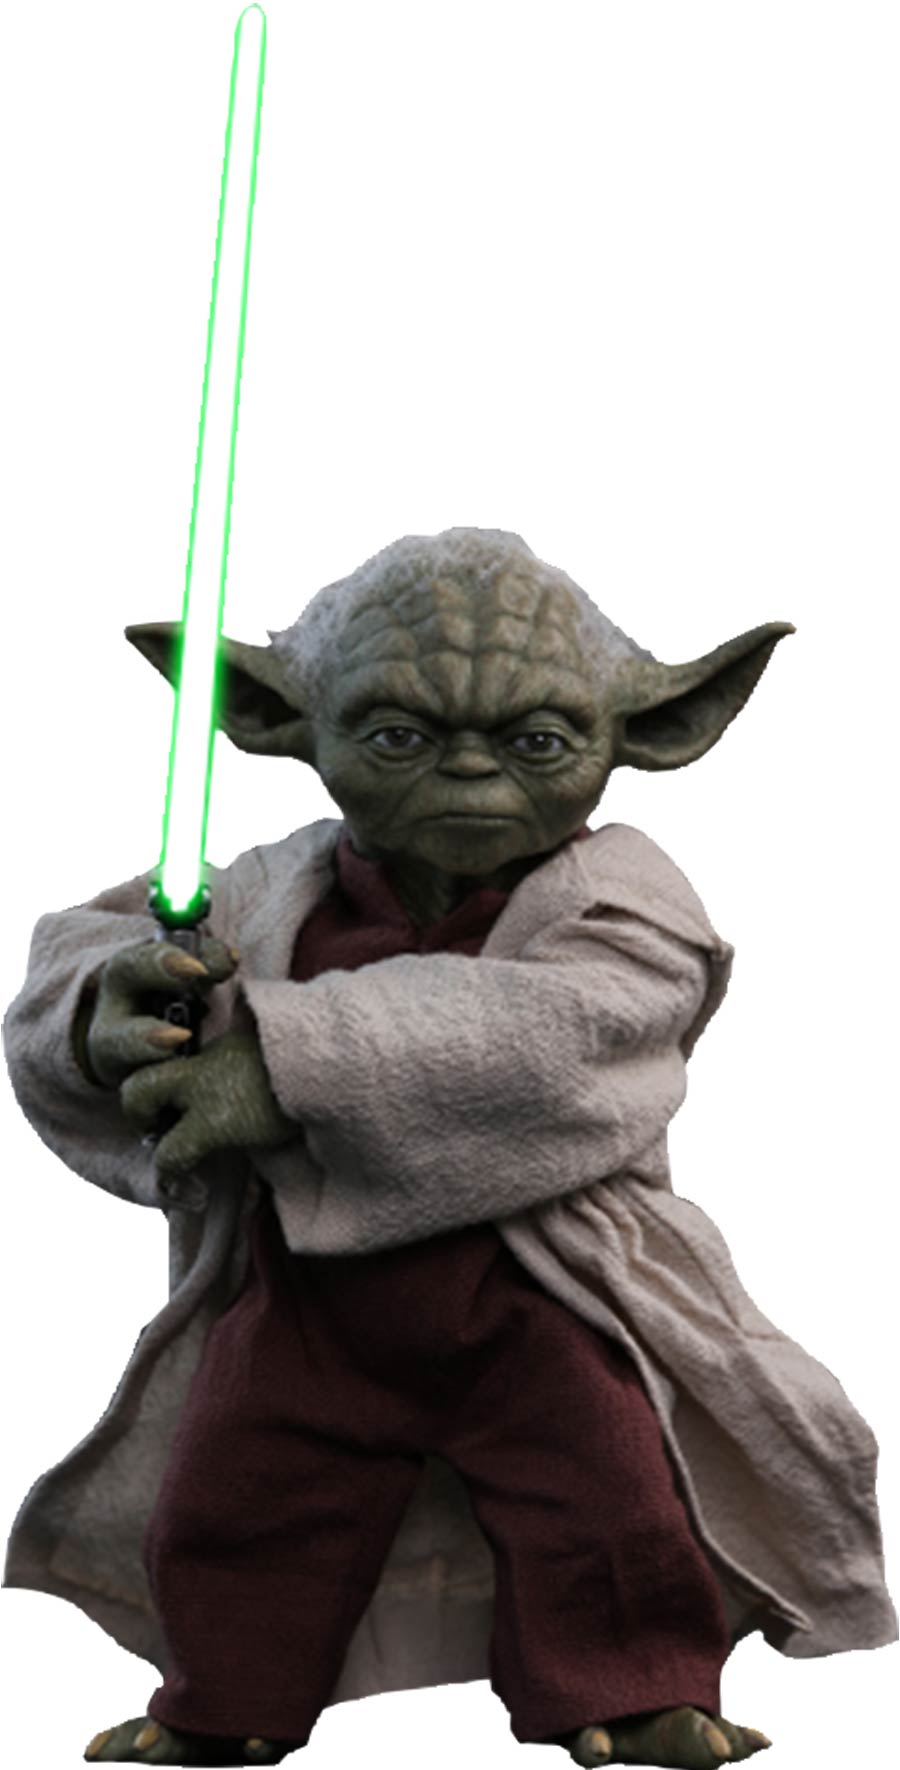 Yoda Star Wars Episode II Attack Of The Clones Movie Masterpiece Series Sixth Scale Figure